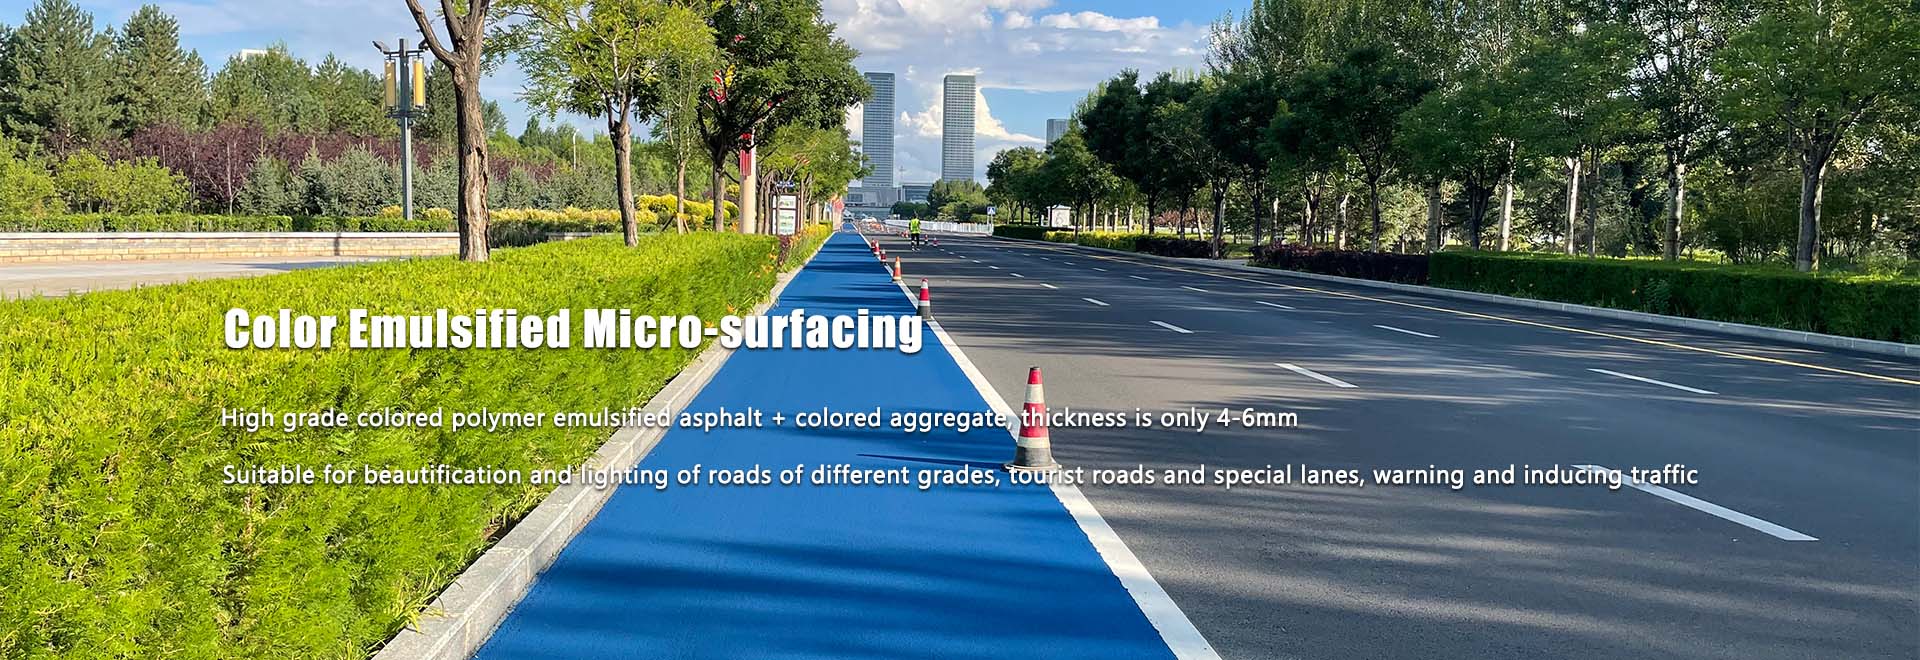 Color Emulsified Micro-surfacing